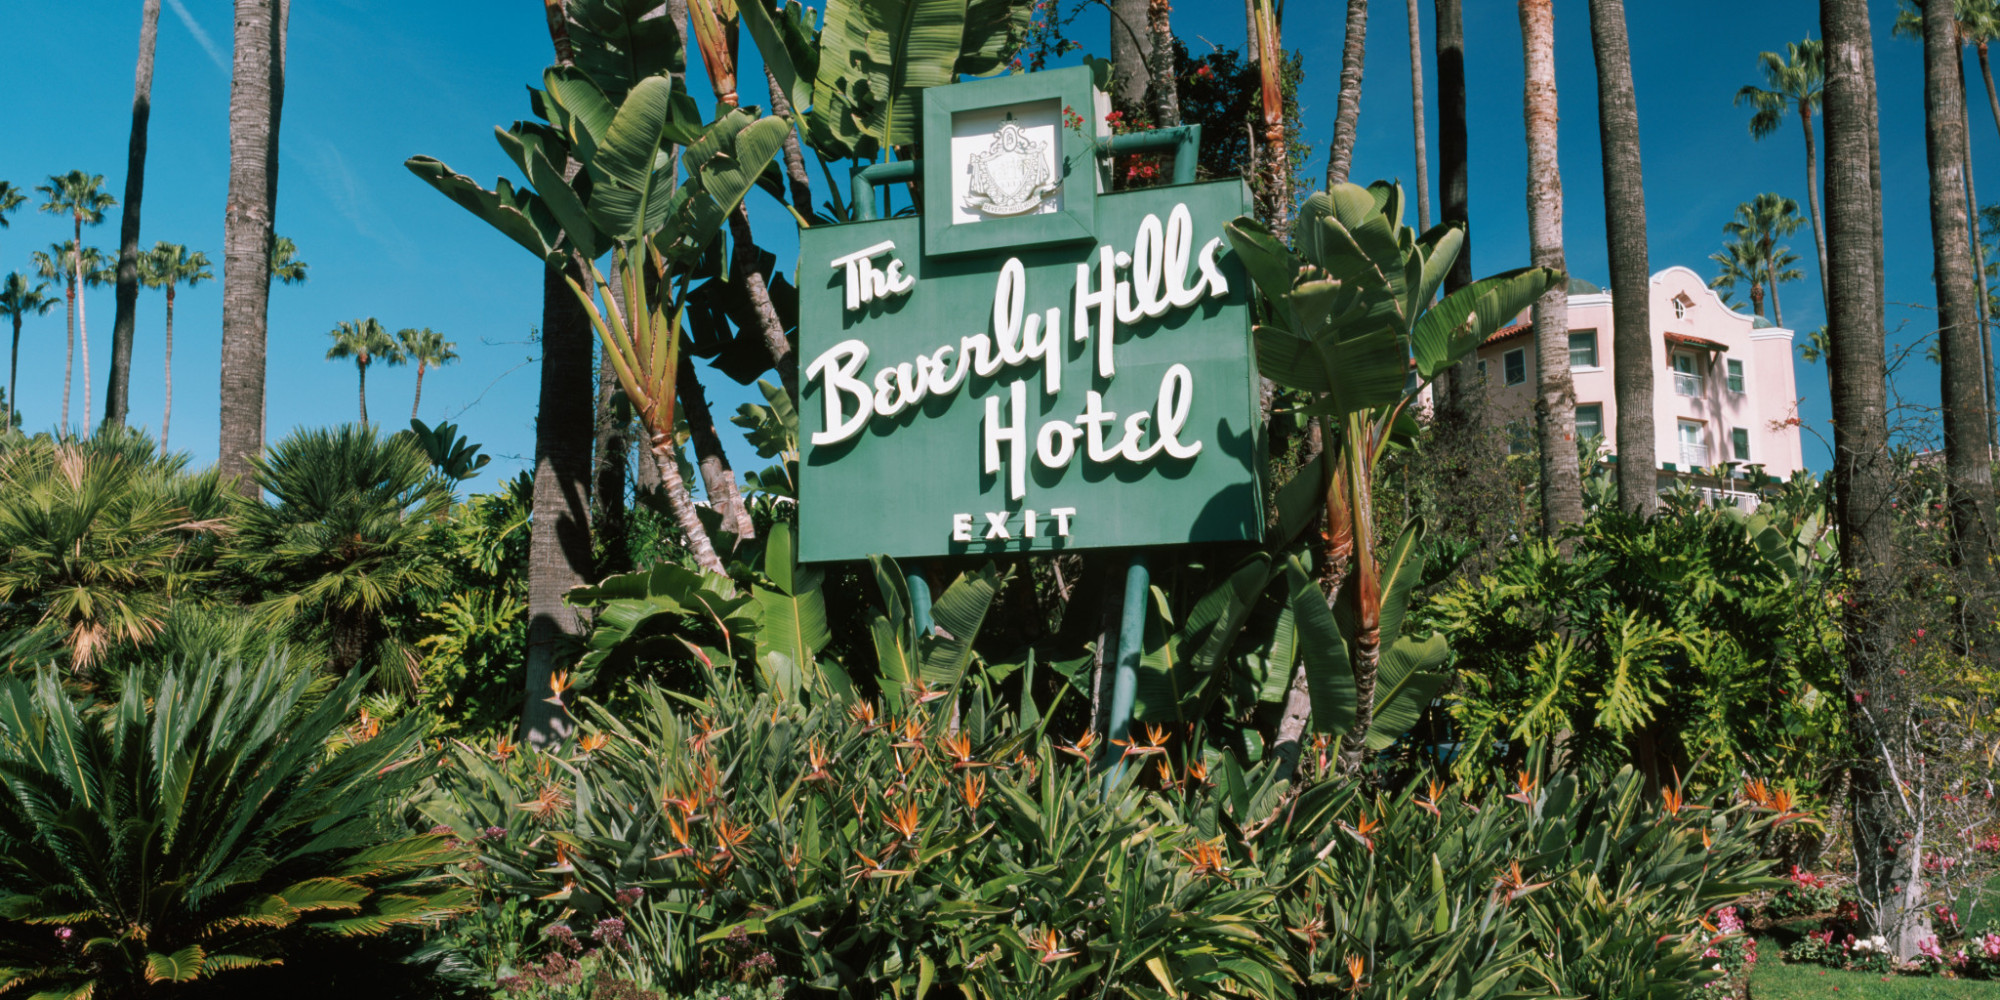 Beverly Hills Hotel The Subject Of Boycott Over Ties To AntiGay 